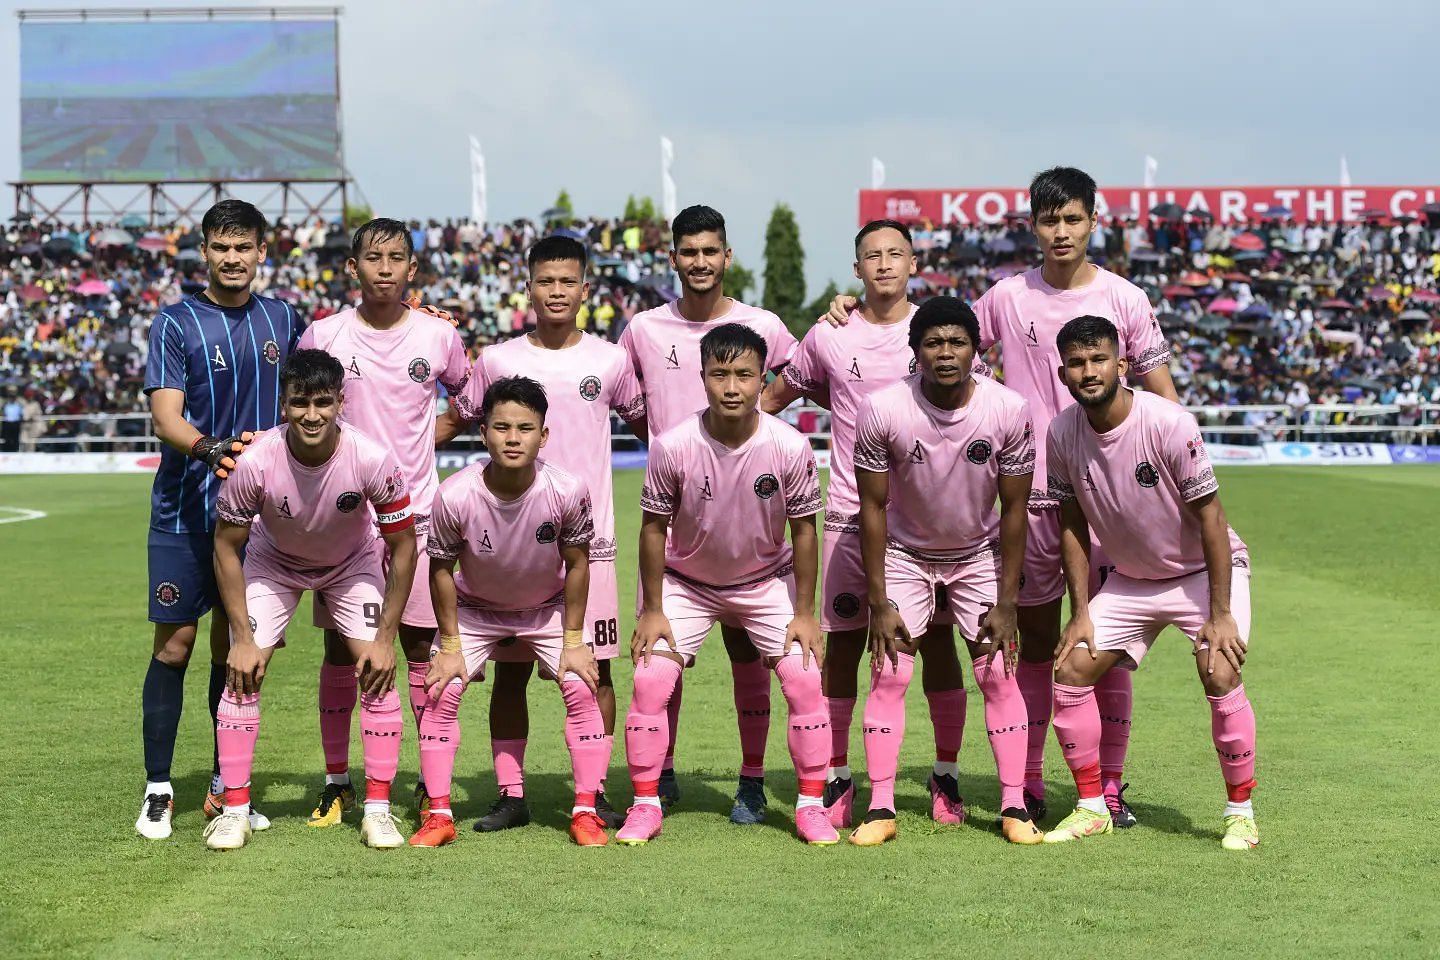 Rajasthan United will look to continue their winning streak against Odisha FC (Image Credits - RUFC Media)